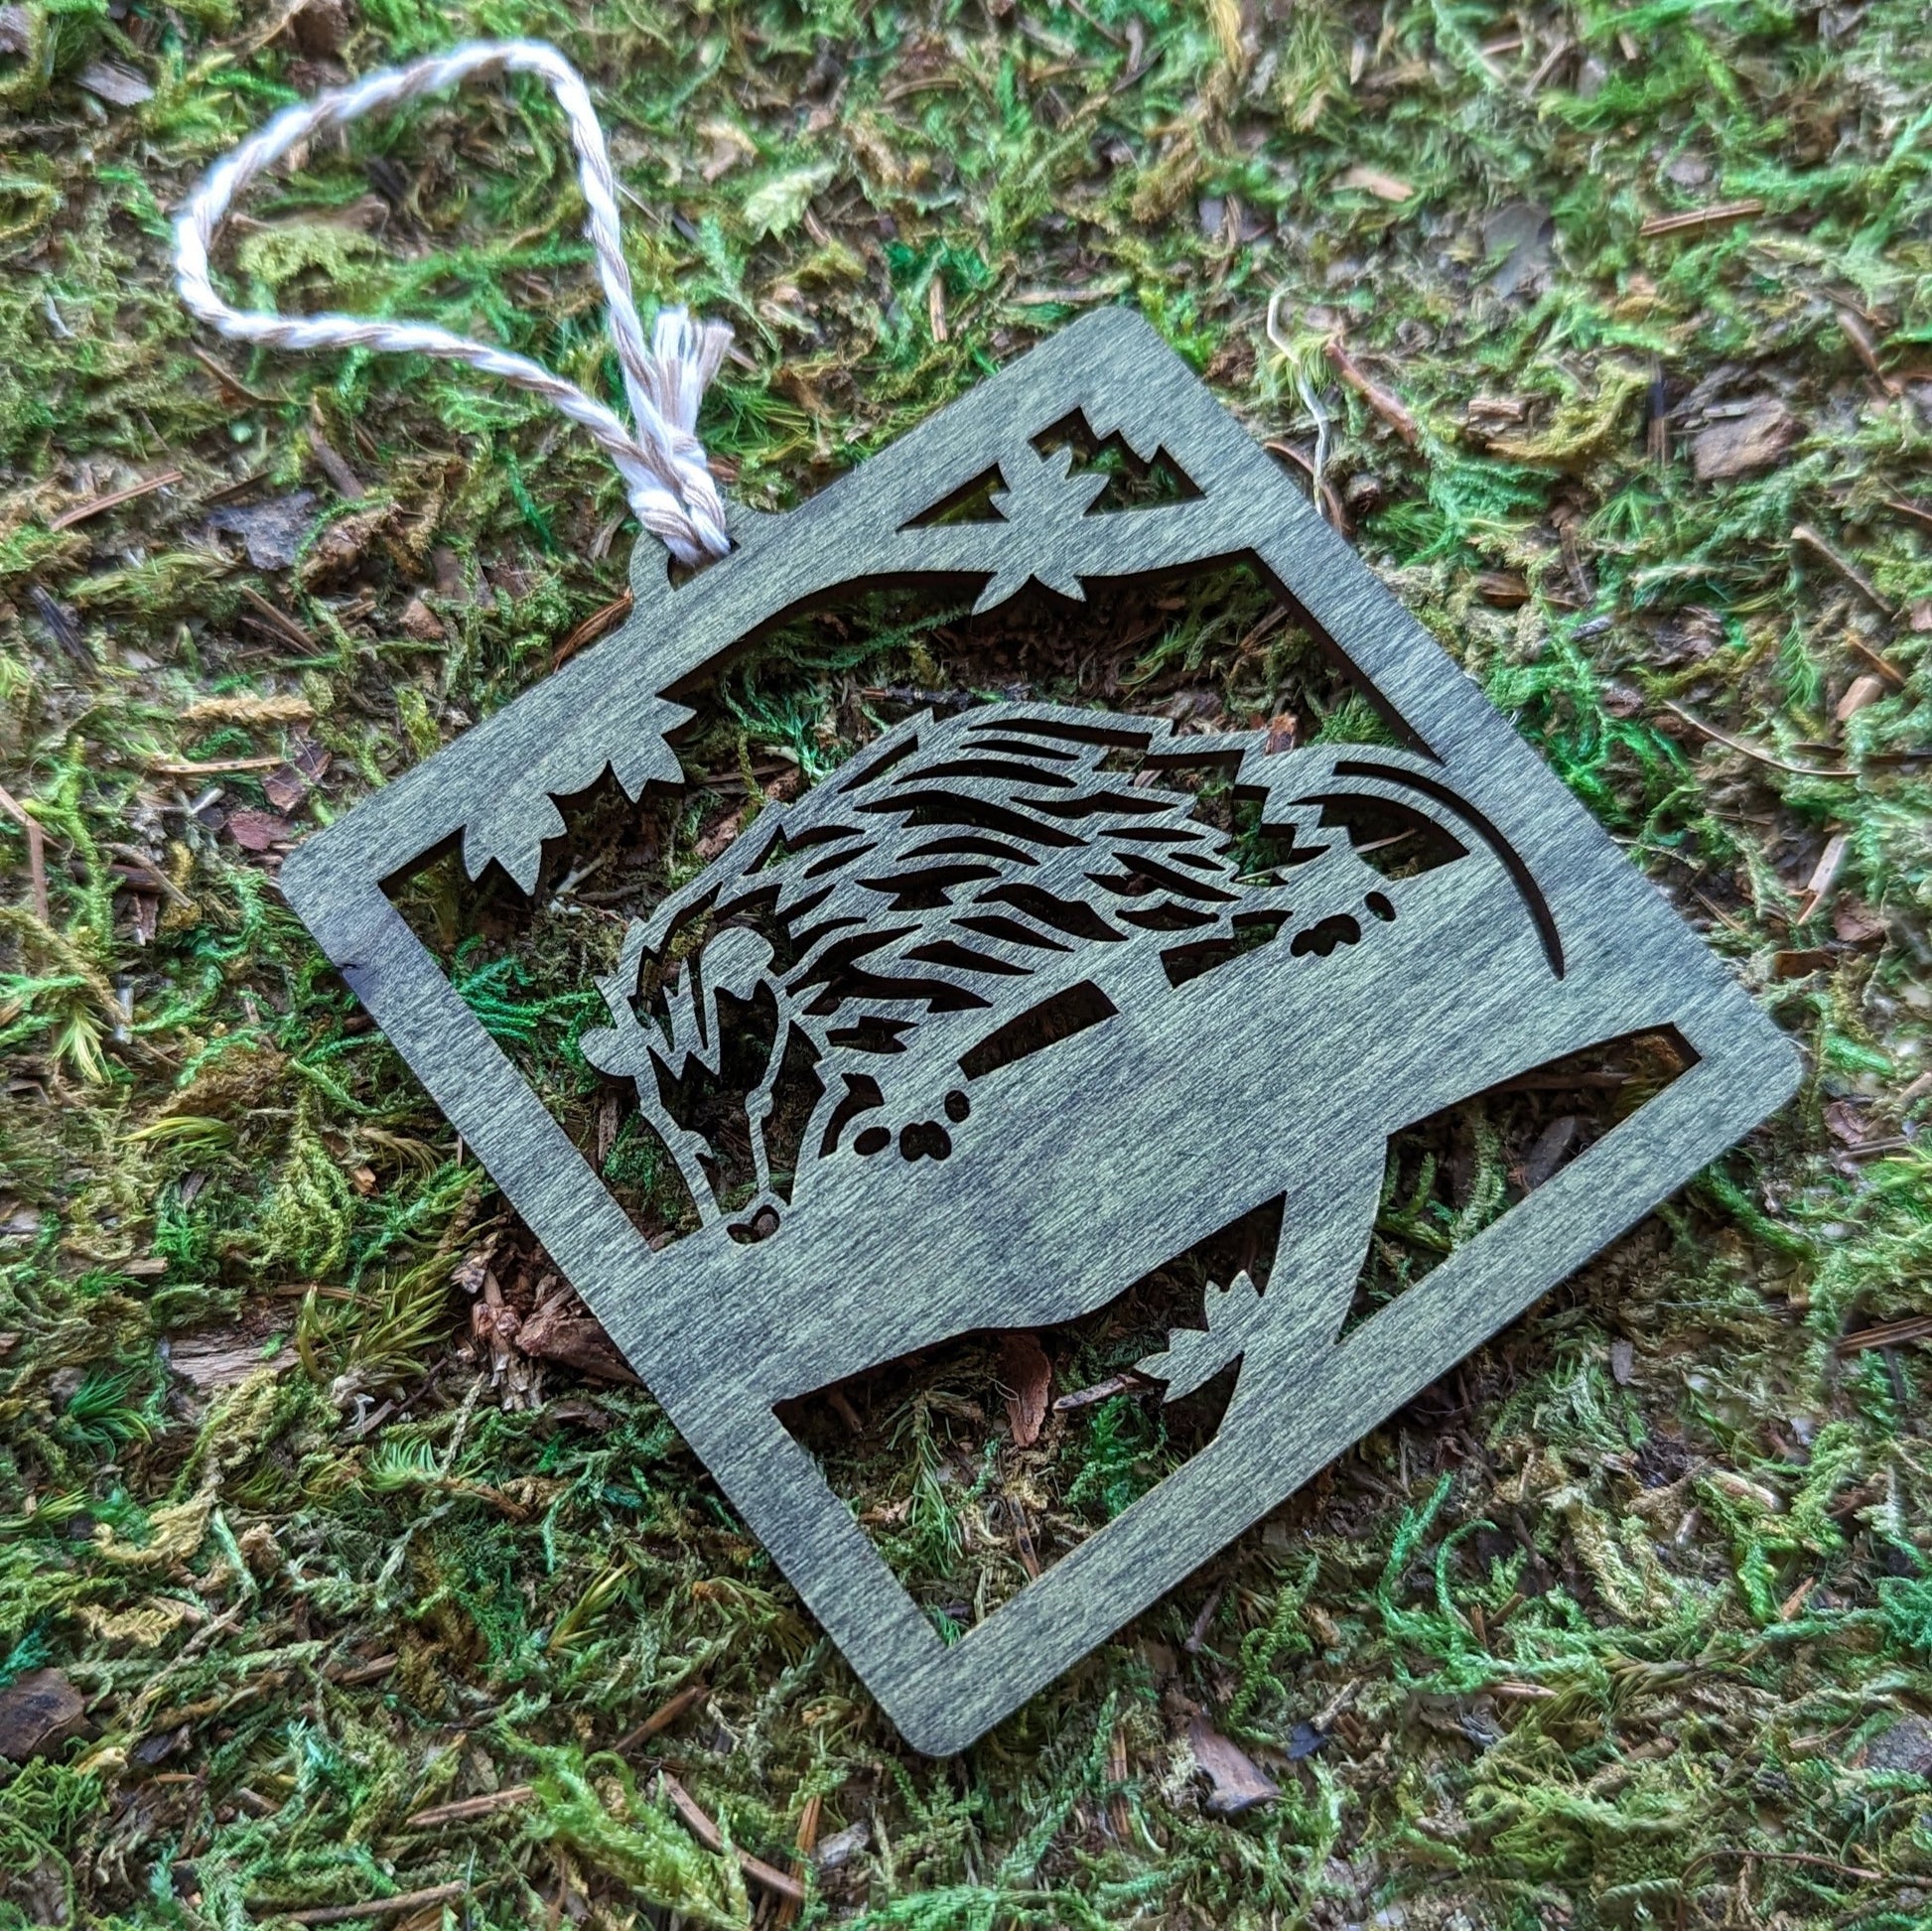 A wooden laser cut ornament of an opossum on a tree branch colored with green wood dye on a mossy background.